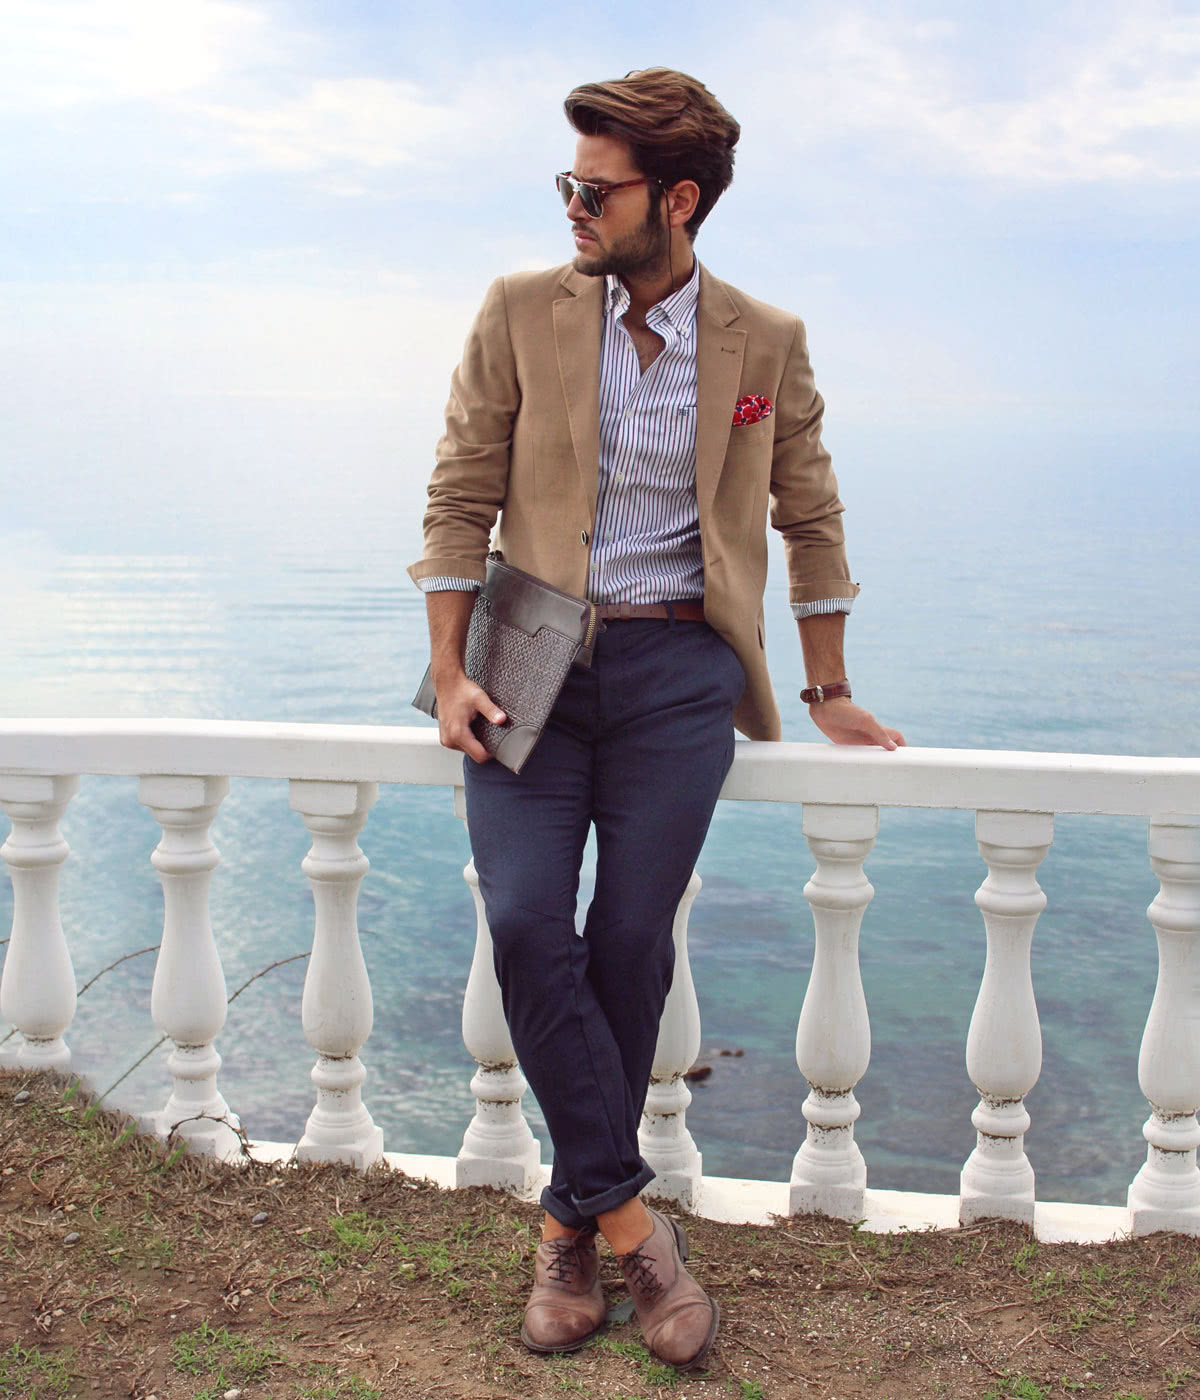 Smart Casual Dress Code For Men: Ultimate Style Guide (2020 Updated)